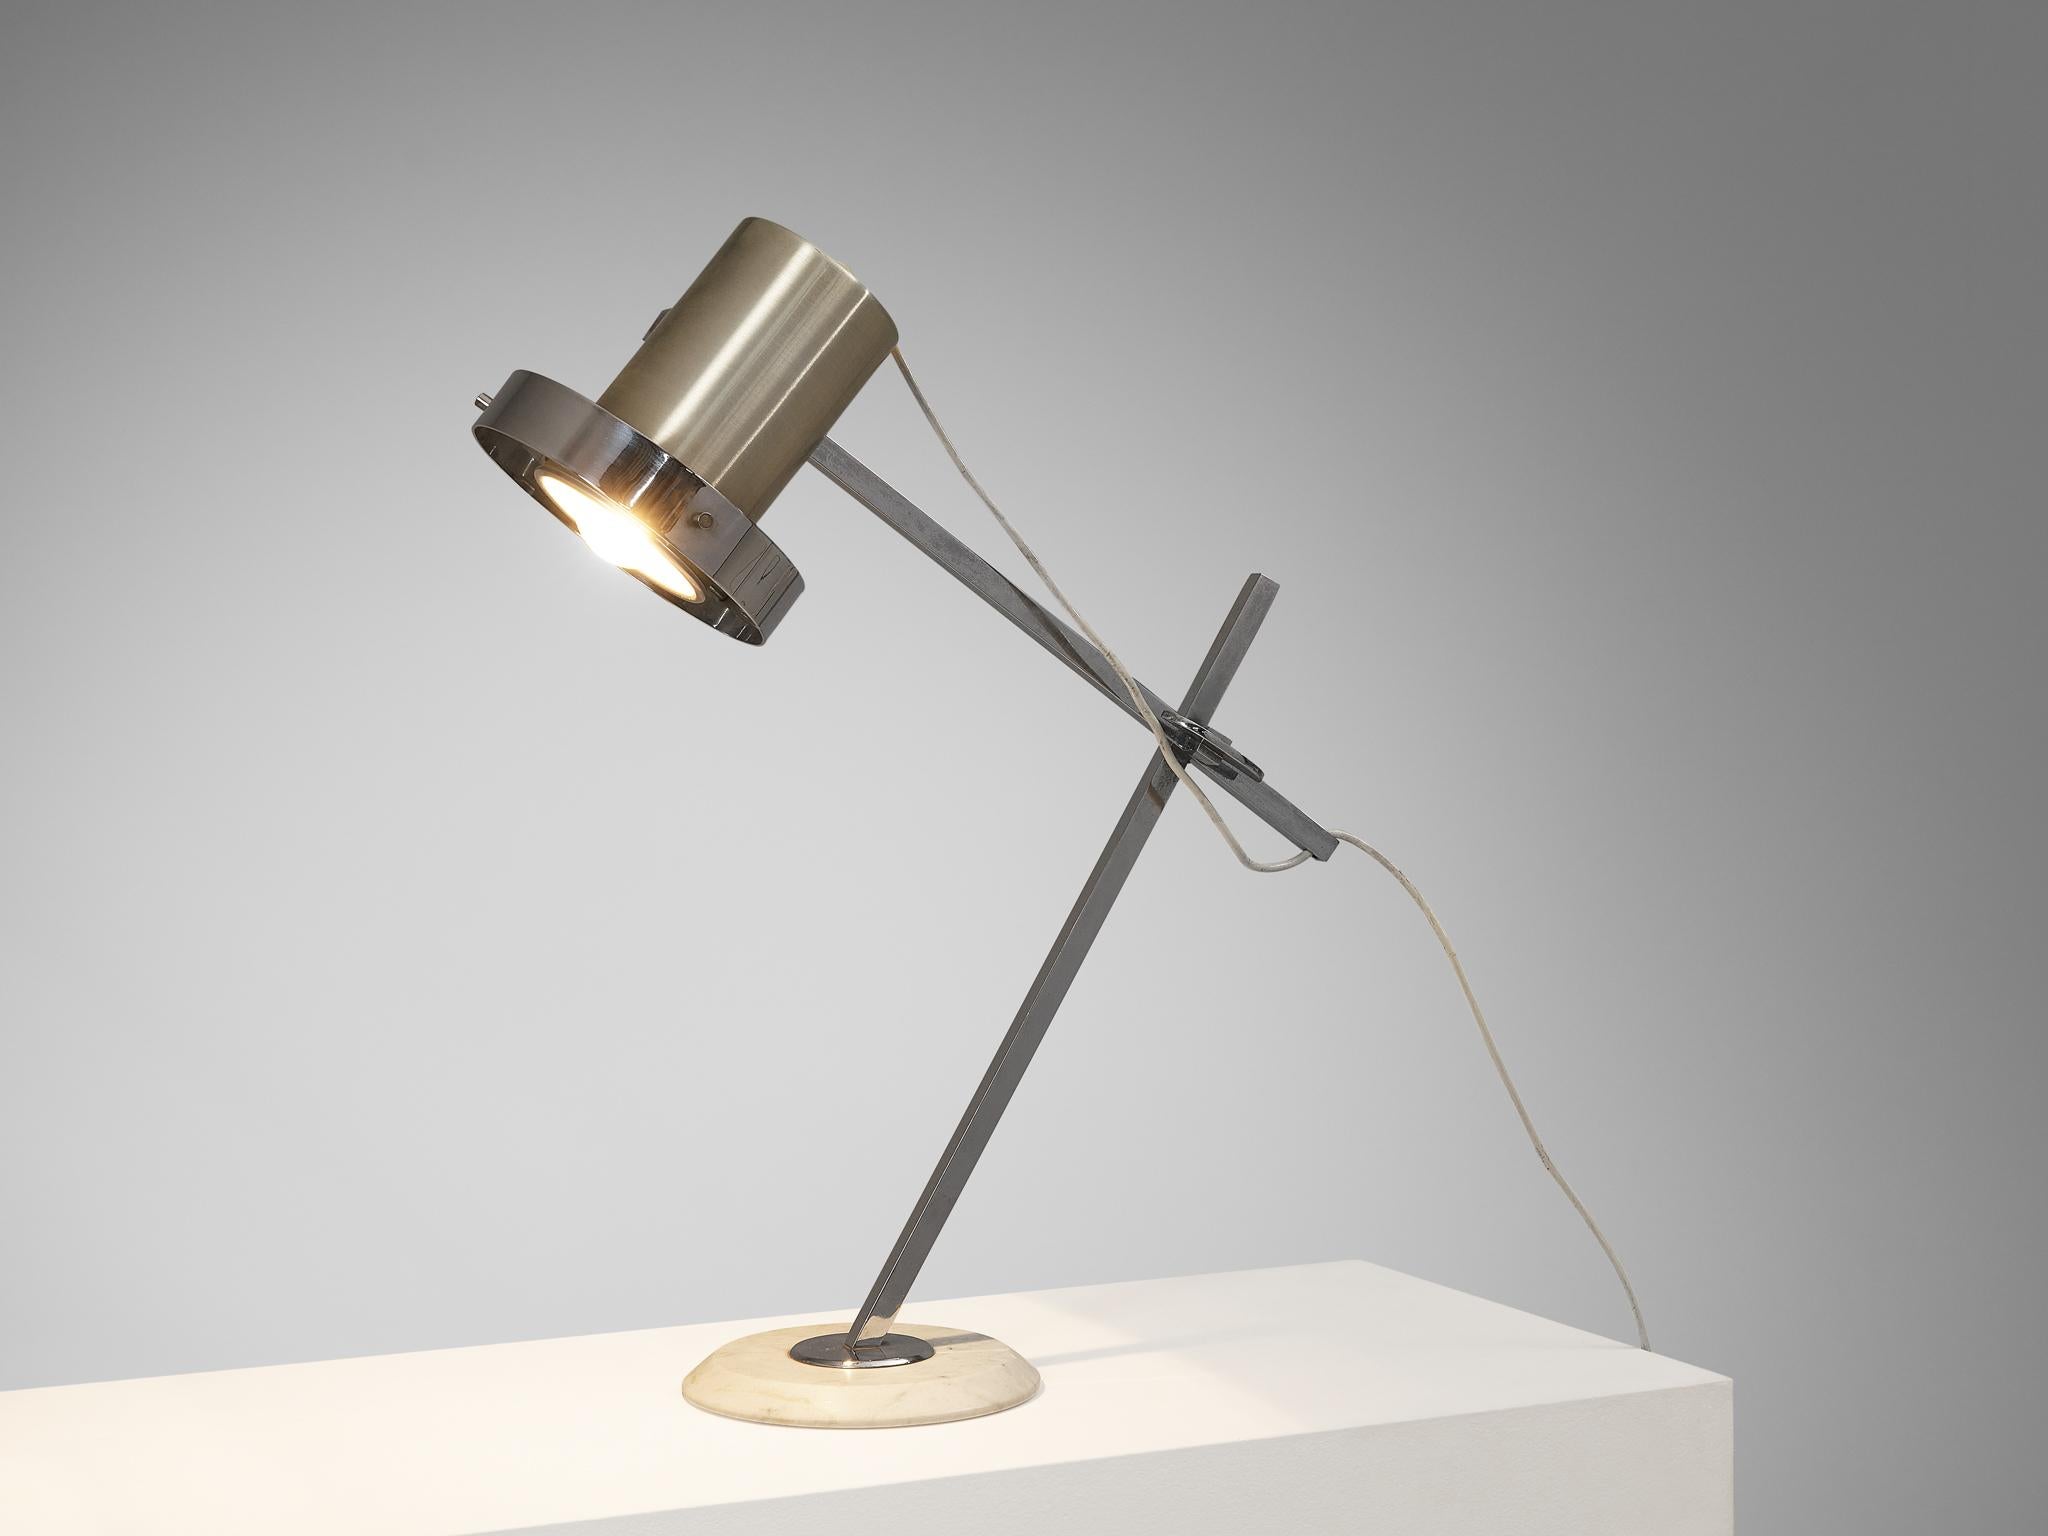 Desk lamp, brushed aluminum, chrome-plated aluminum, Carrara marble, Italy, 1960s

This industrial table lamp is of Italian origin created around the 60s. The designer prioritized practicality and utility combined with a simple layout. The position